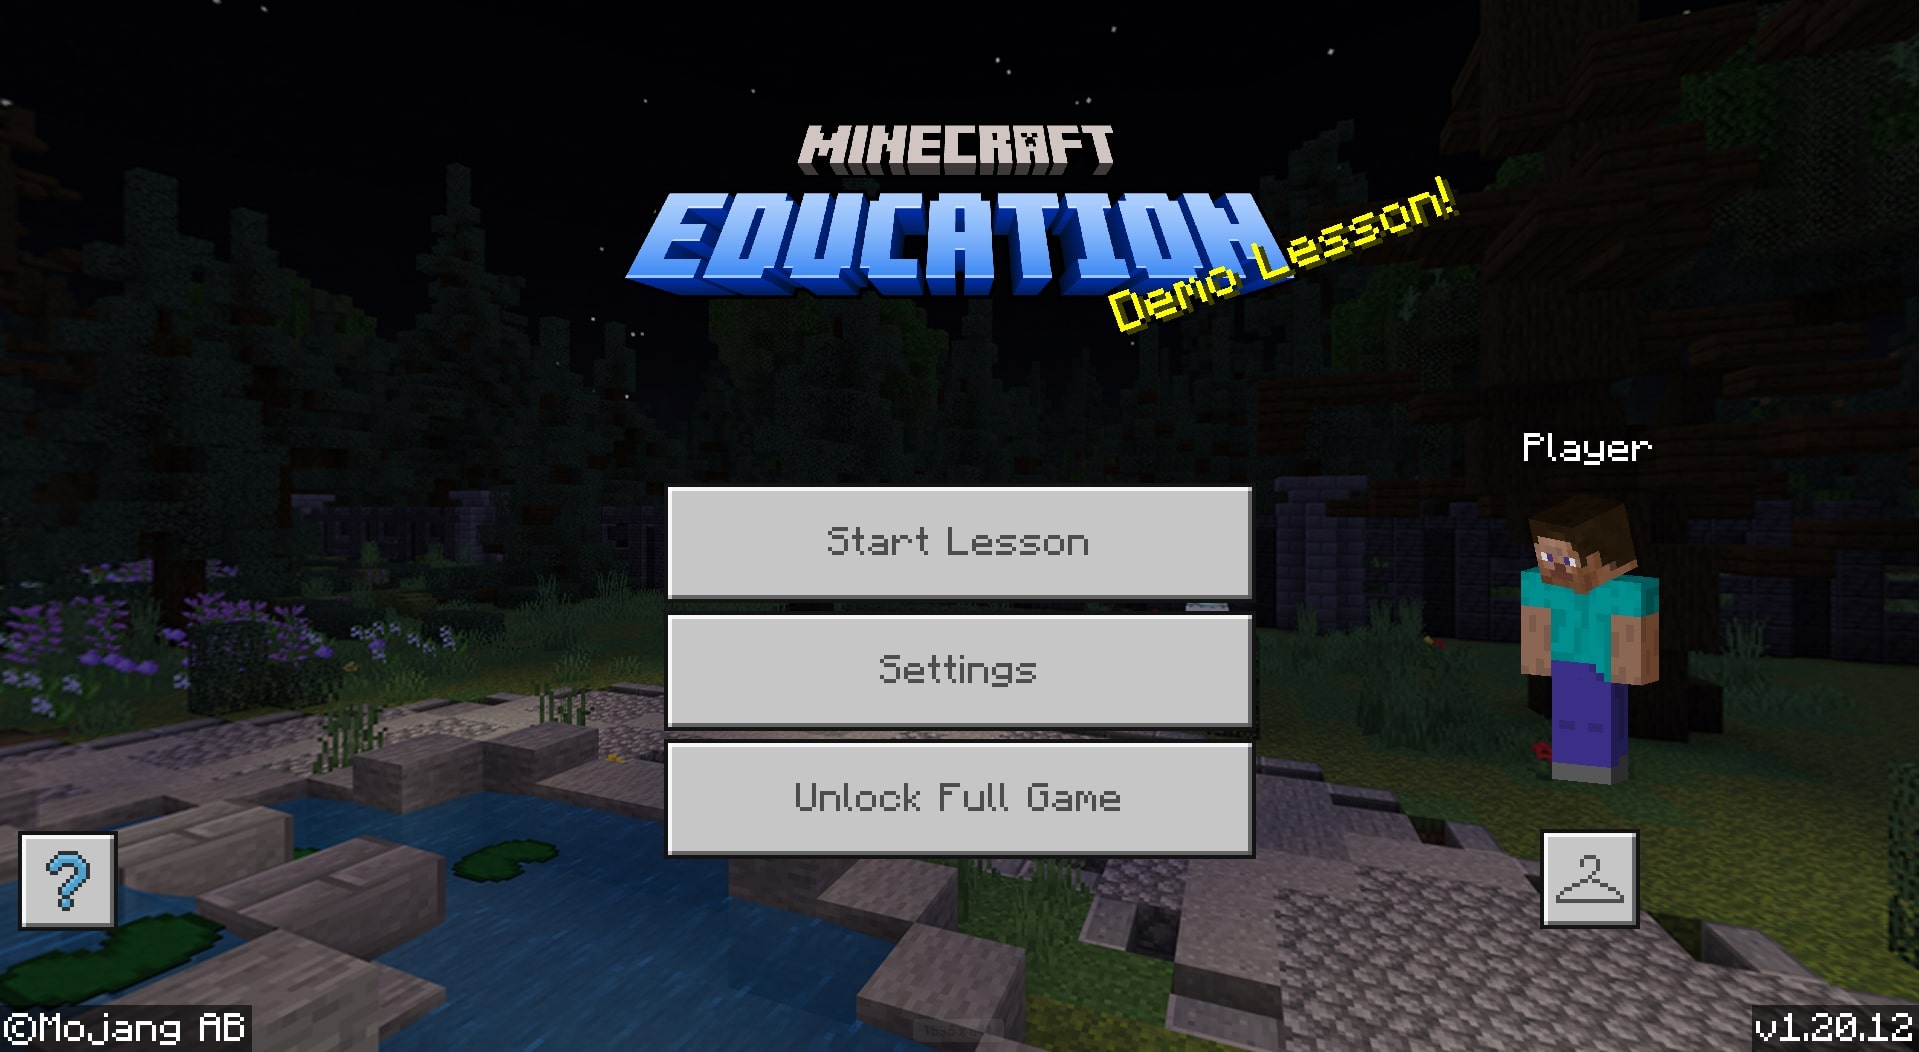 Starting a lesson in the Minecraft Education demo account